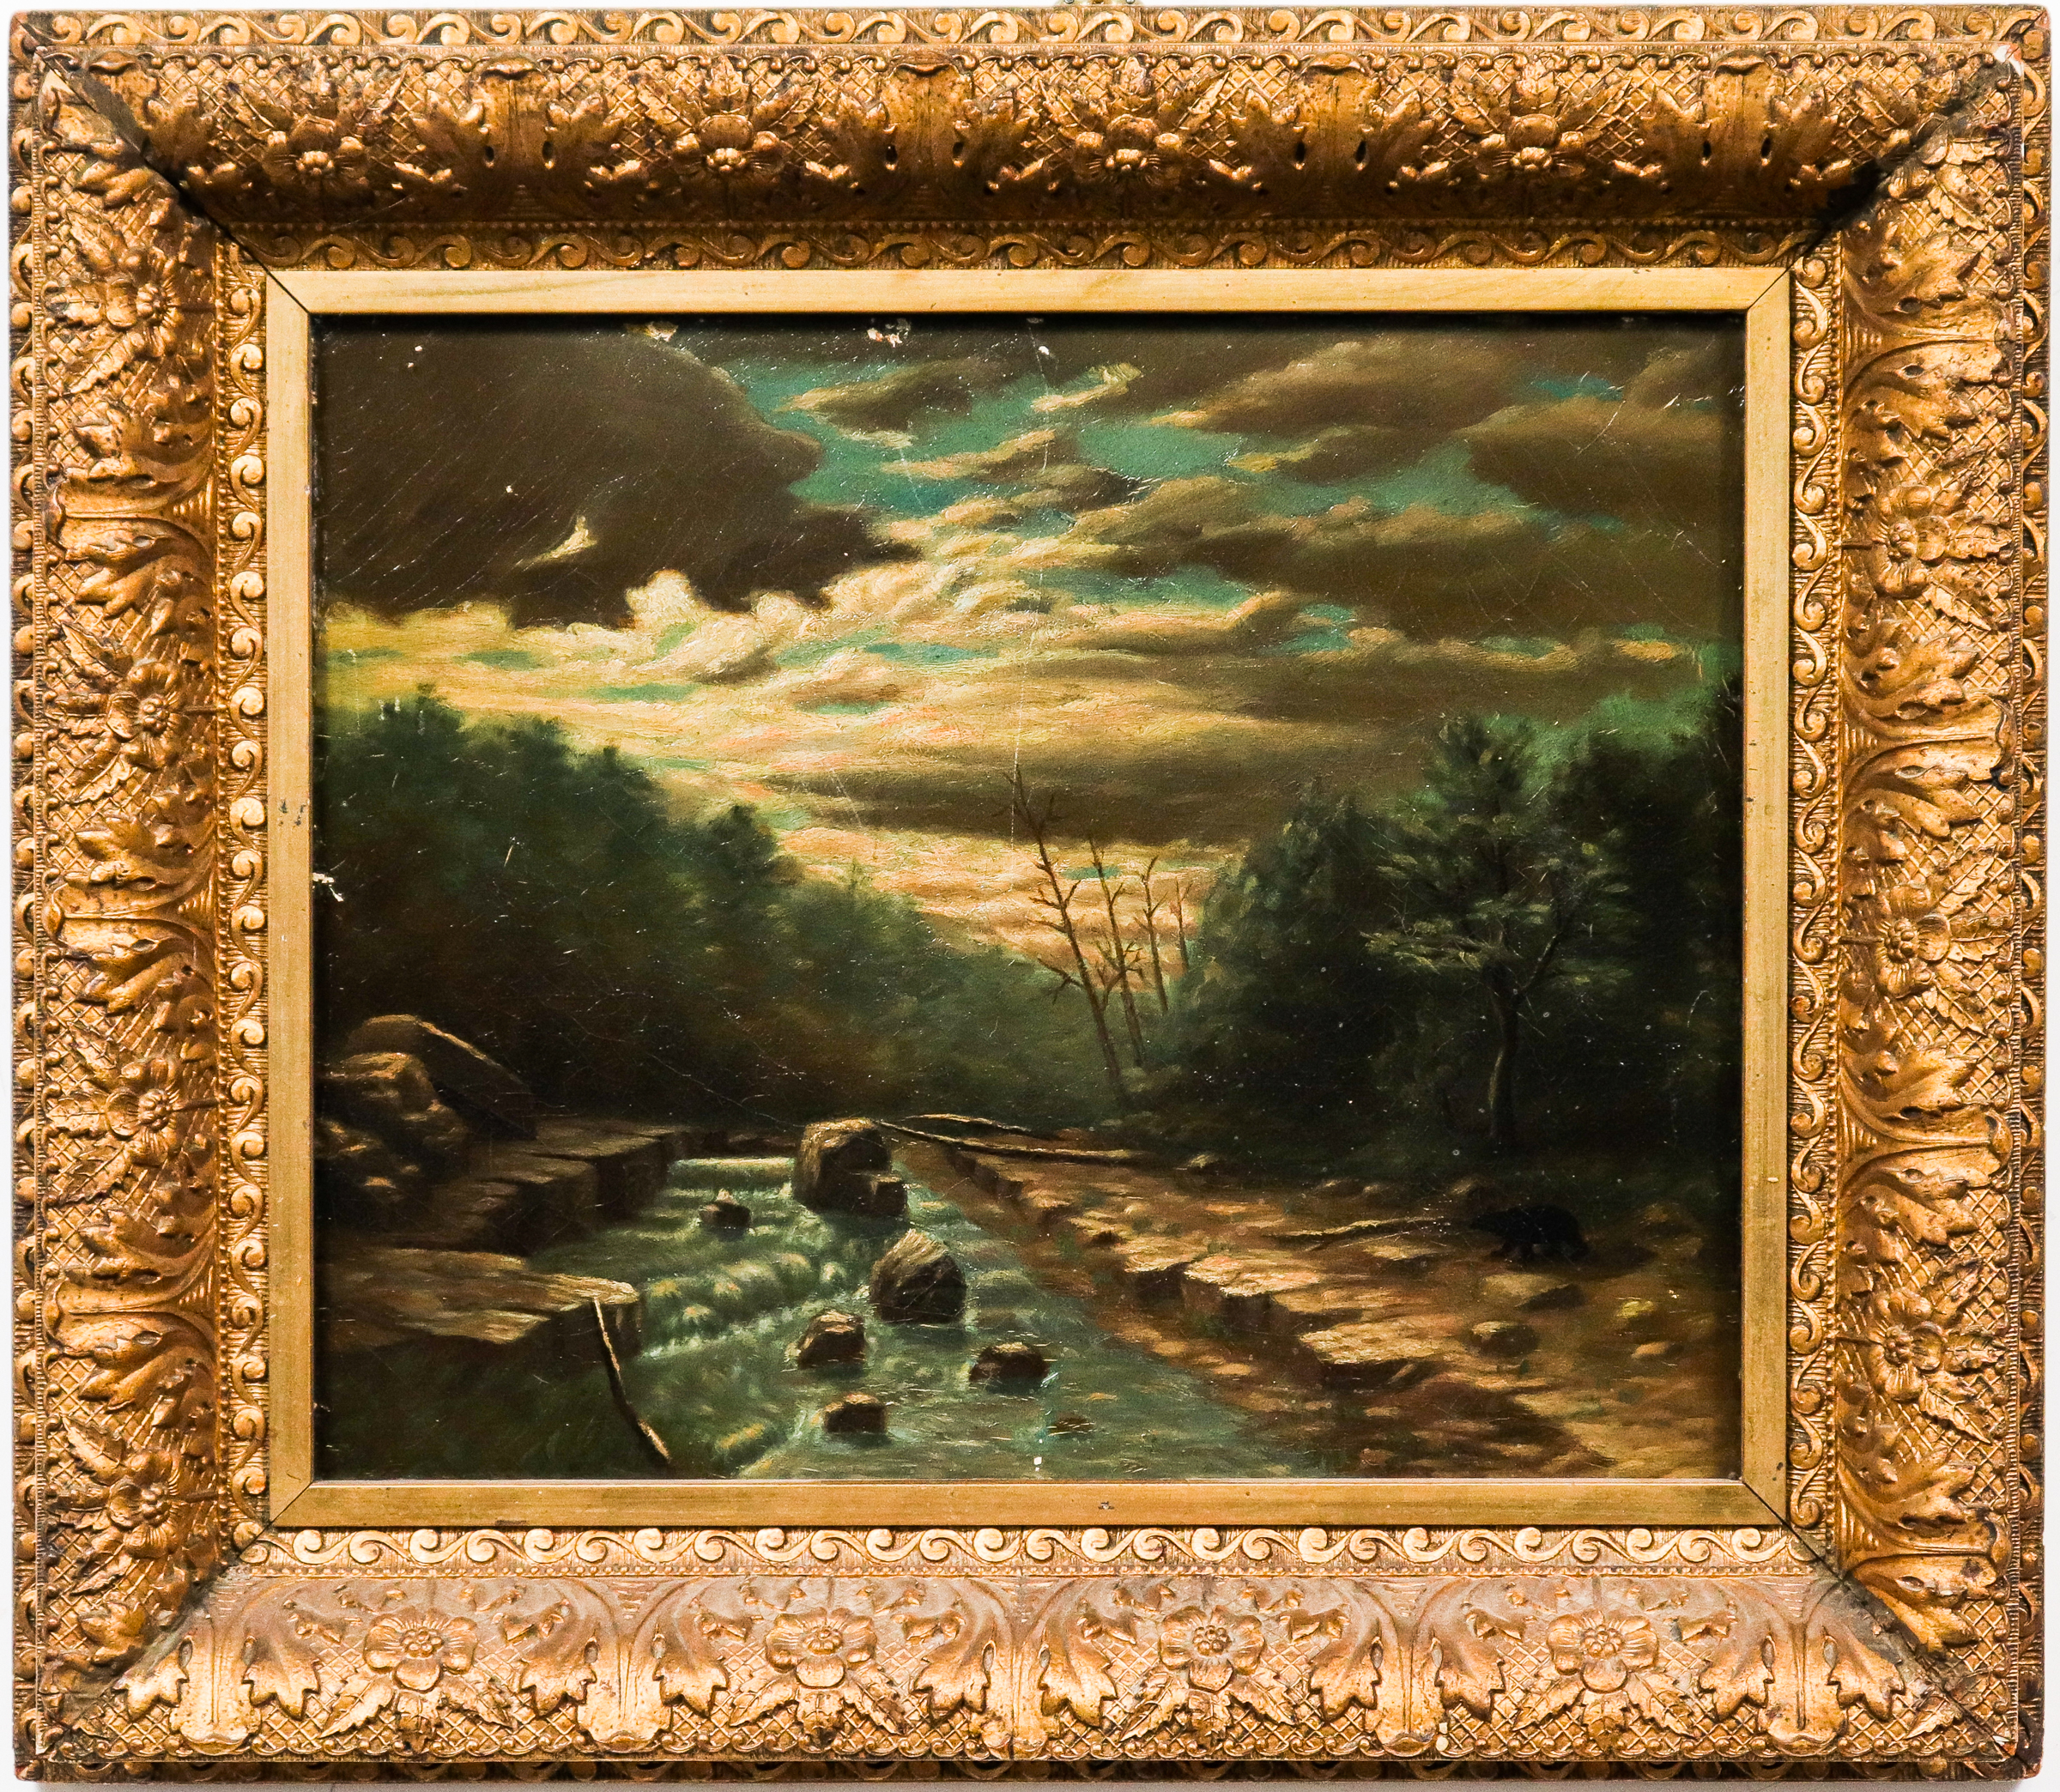 LATE 19TH C. "RIVER AT DUSK" OIL